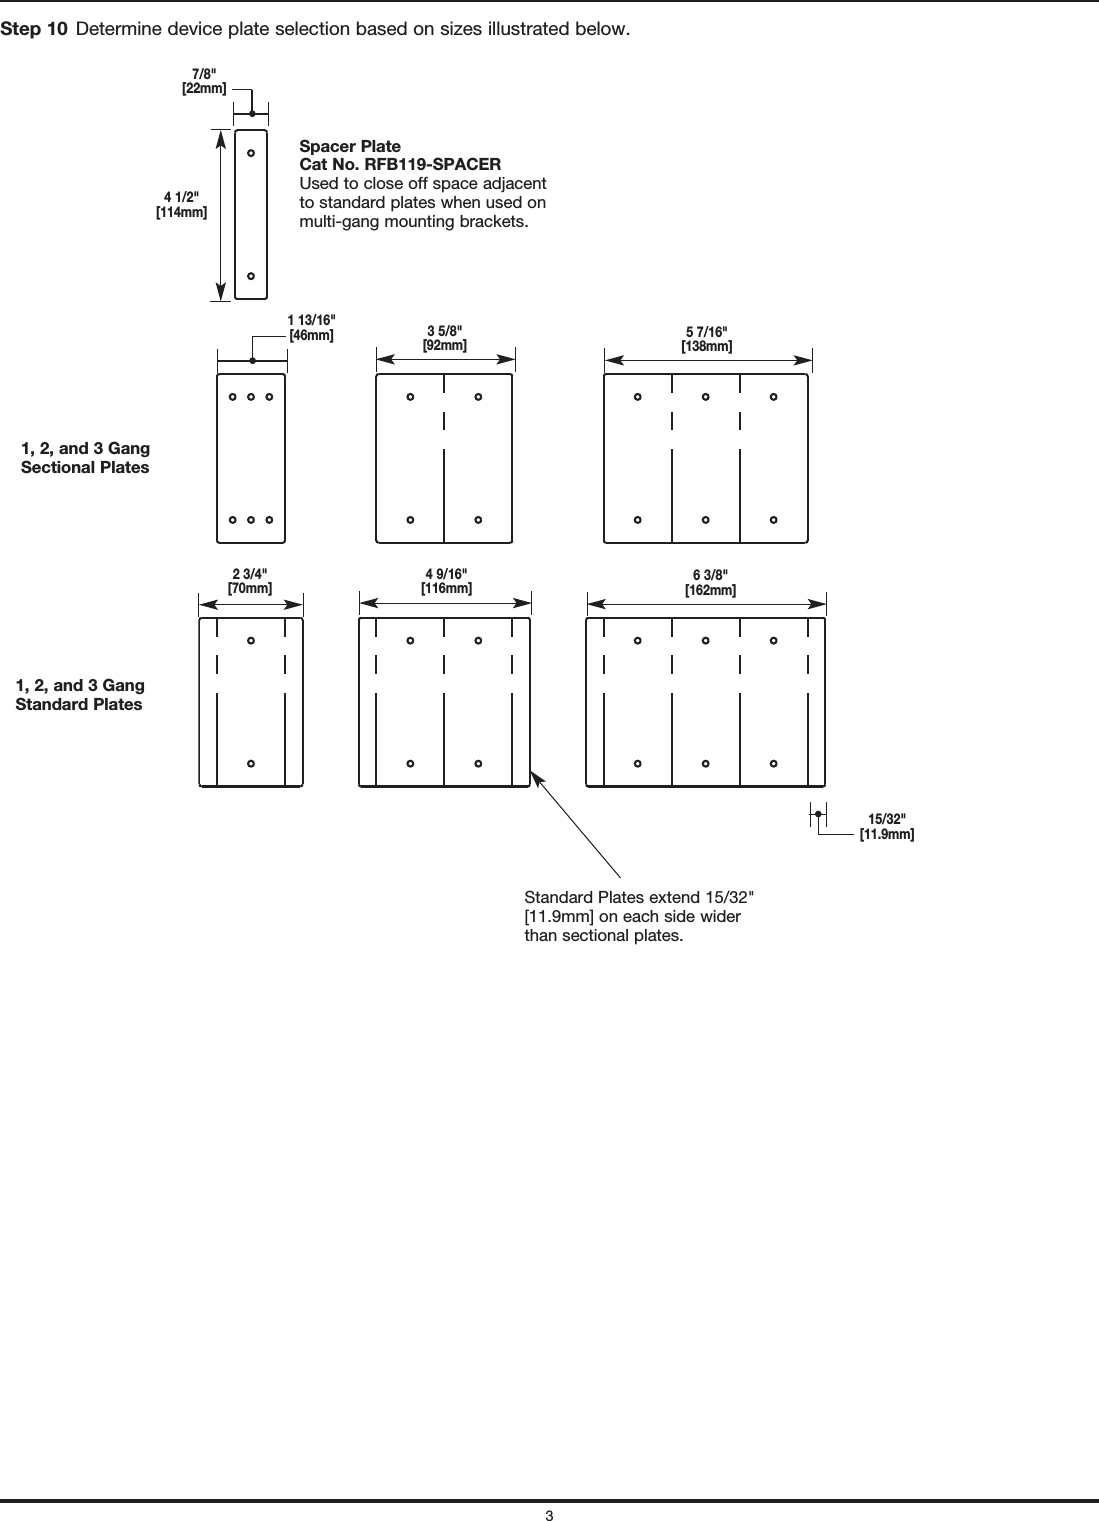 Page 3 of 8 - RFB119 Series Floor Box Installation Instructions  Directions